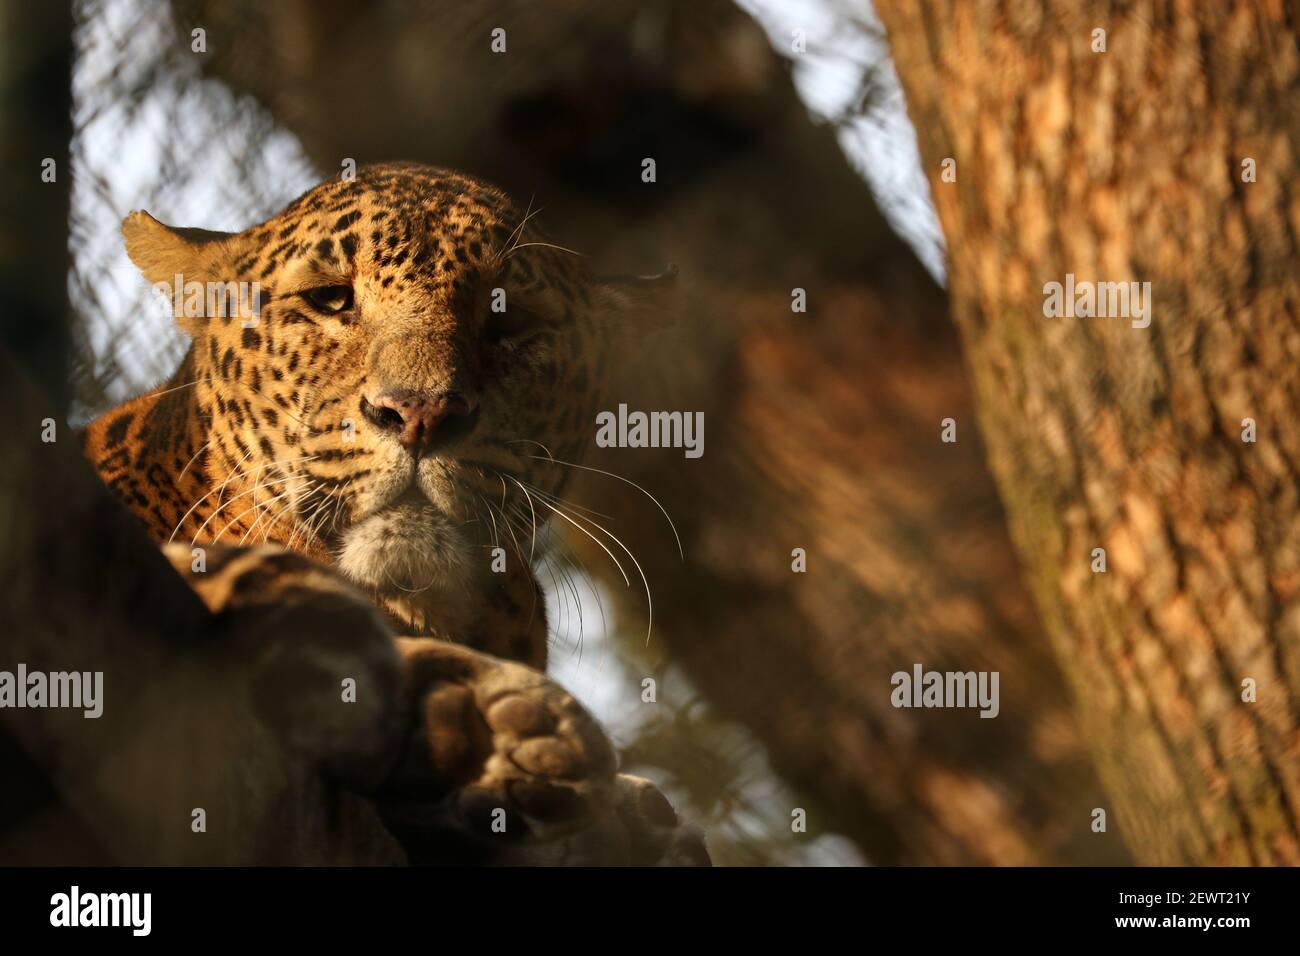 Kathmandu, NE, Nepal. 3rd Mar, 2021. A common leopard is pictured inside the cage at the Central Zoo of Nepal during Prime Minister KP Sharma Oli's visit, in Kathmandu, Nepal, March 3, 2021. Credit: Aryan Dhimal/ZUMA Wire/Alamy Live News Stock Photo